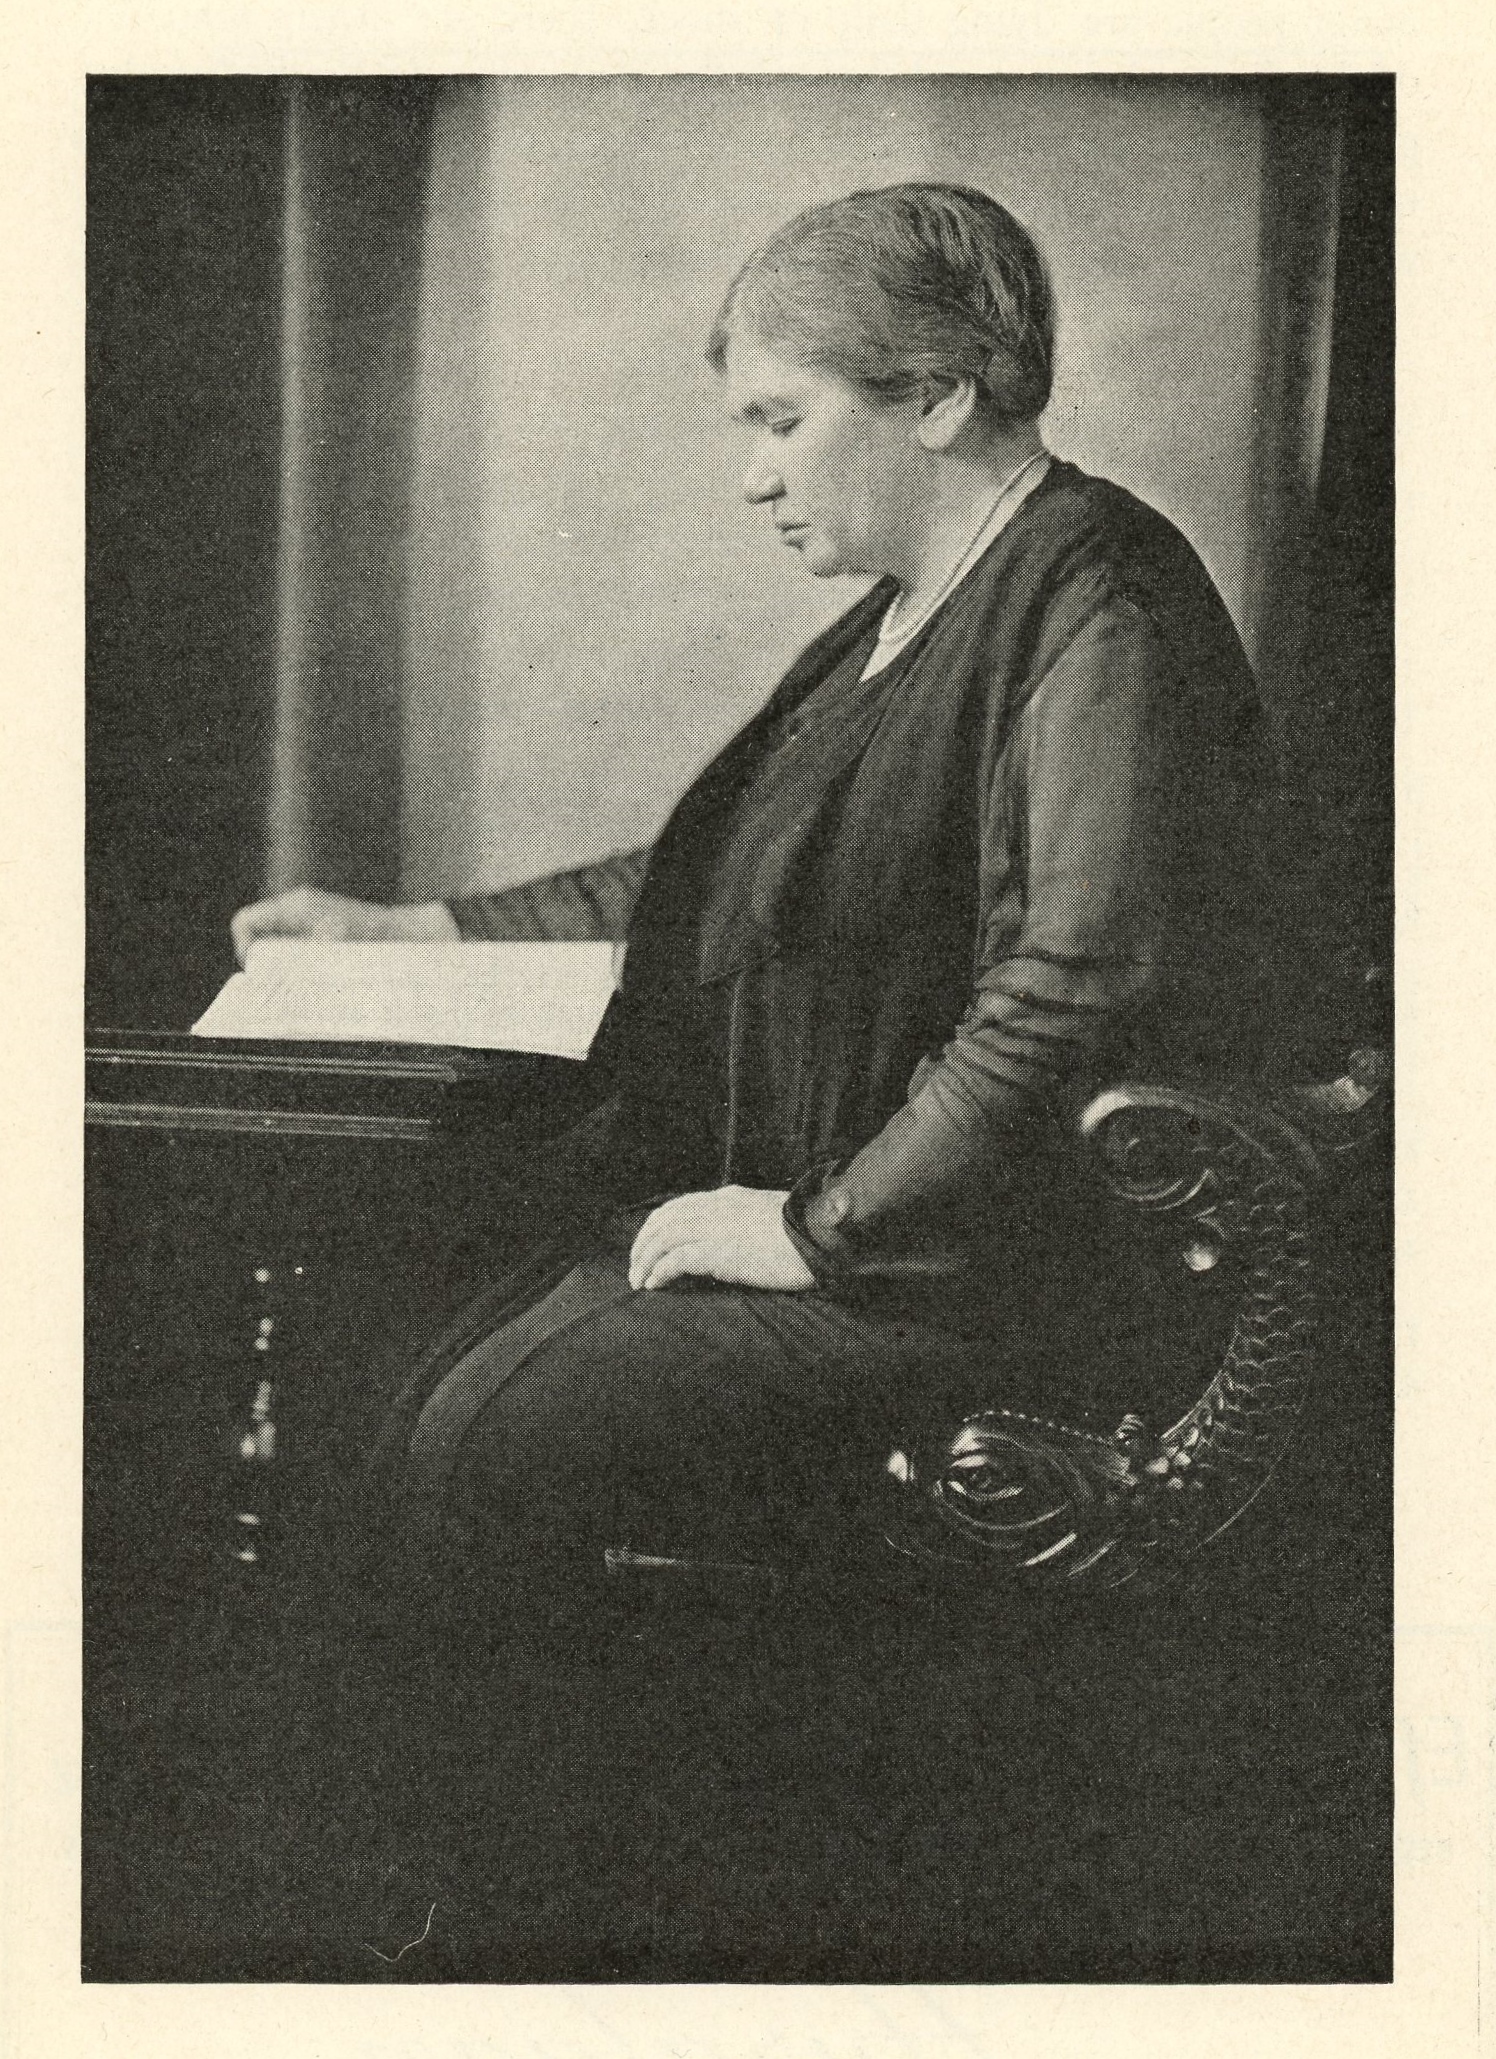 Photograph of an elderly Maude Abbott, black and white. She is seen in profile, looking concentrated, reading a book at a wooden desk and seated on a carved wooden chair. She is wearing dark clothes and a pearl necklace, and her hair is tied behind her head.